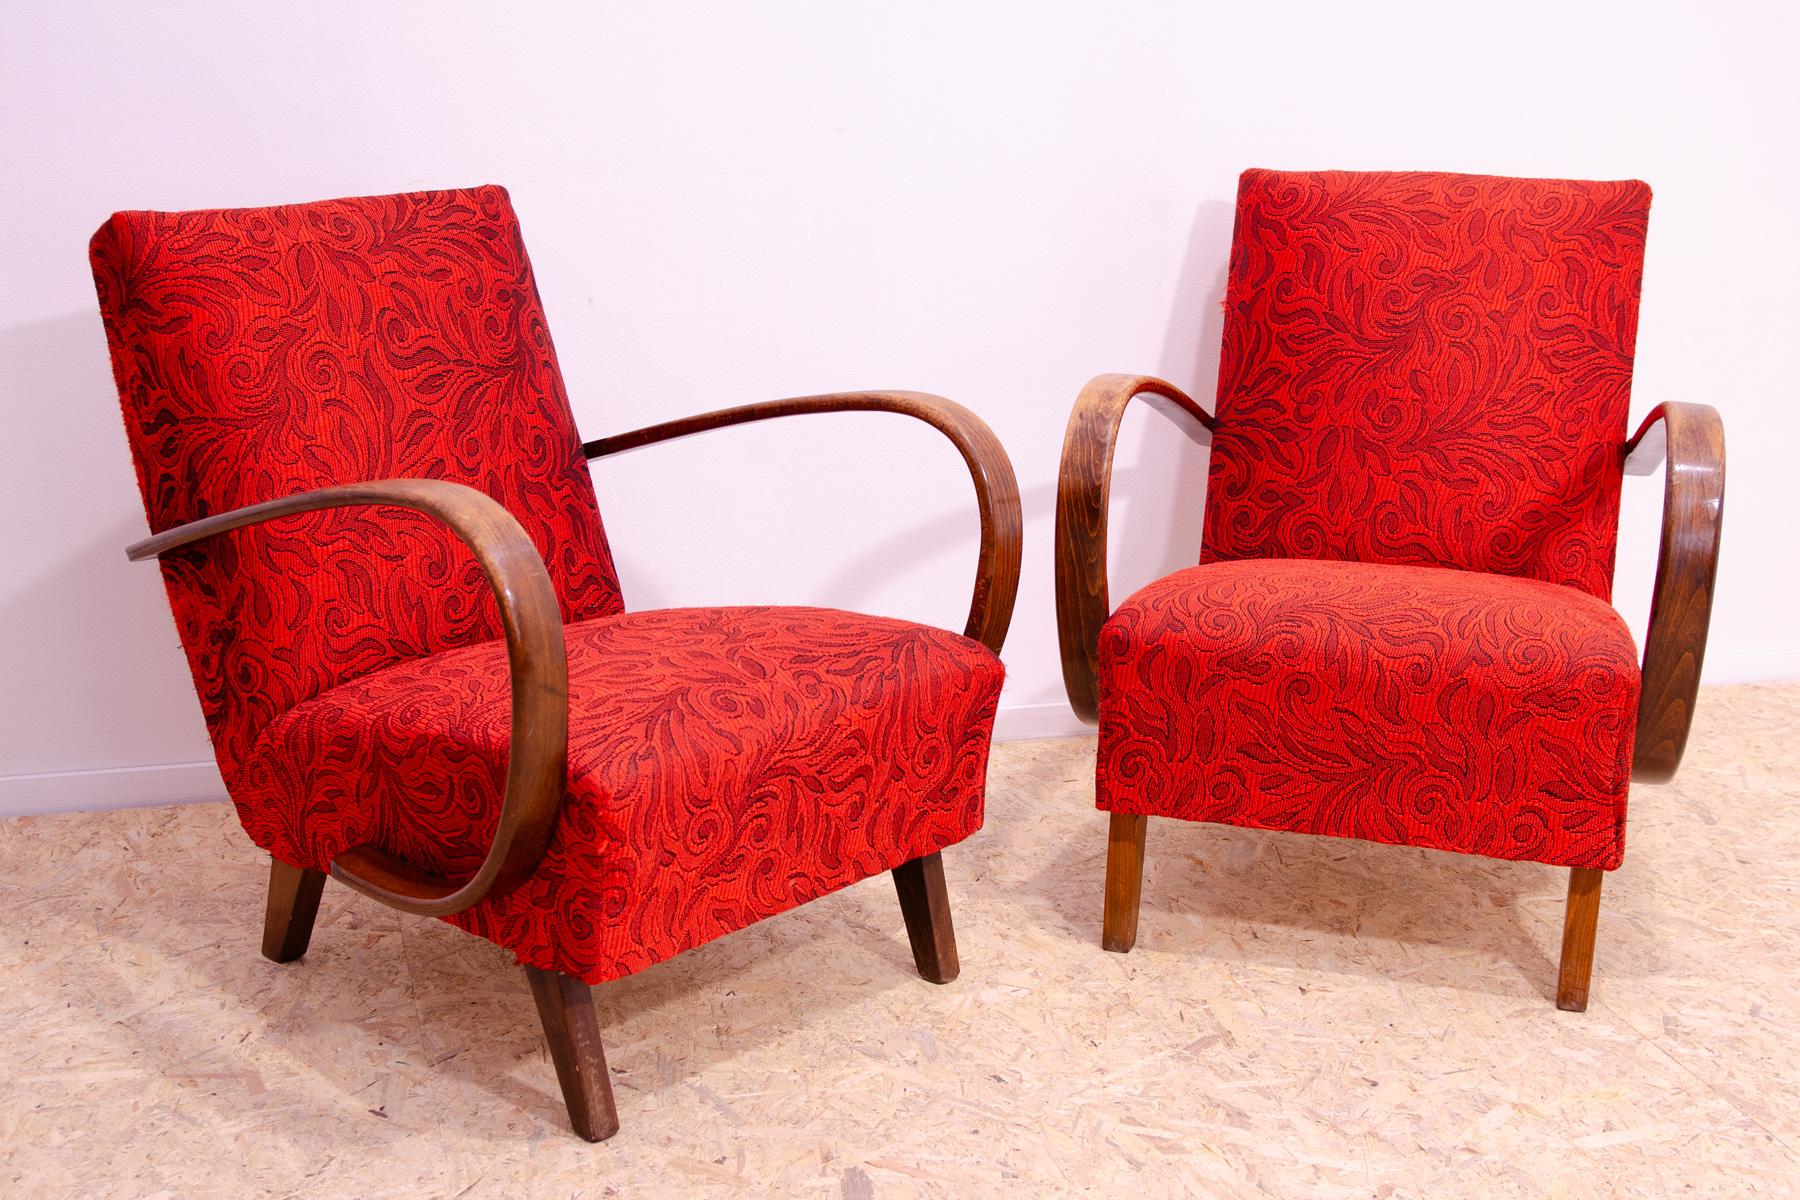 These midcentury bentwood armchairs were designed by Jindřich Halabala and made in the former Czechoslovakia in the 1950´s.

They are in very good Vintage condition, showing slight signs of age and using

Made of bent beech wood.

Price is for the